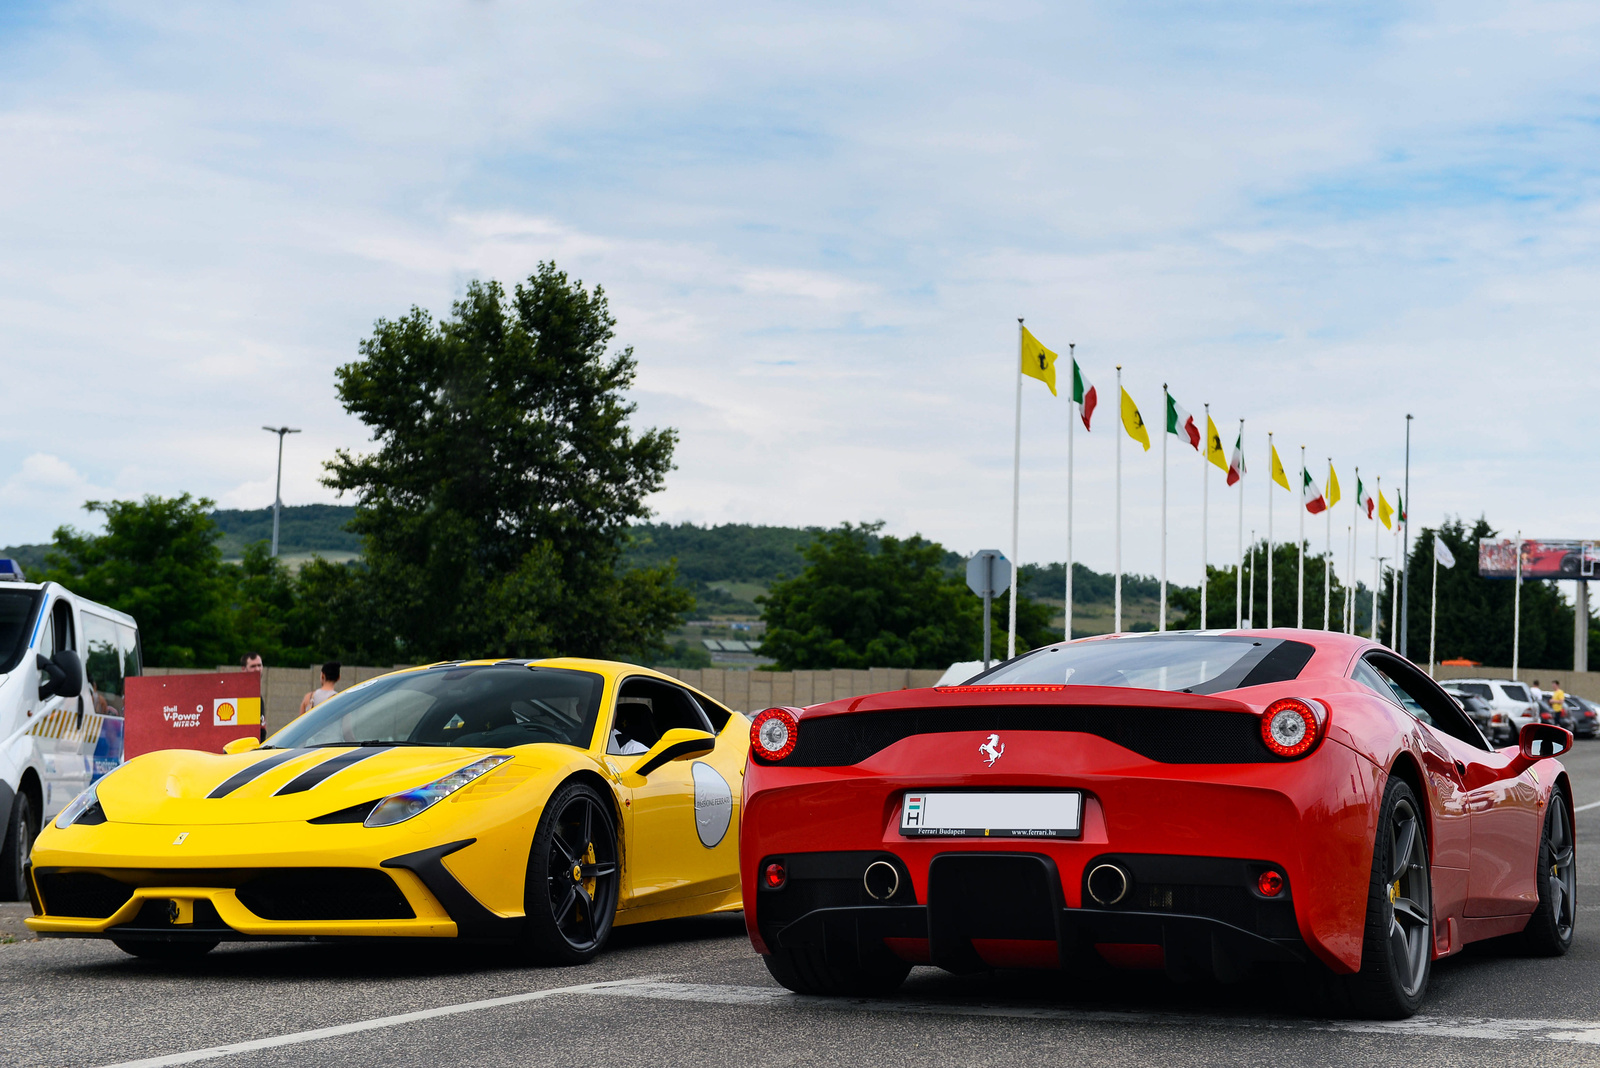 Speciale combo